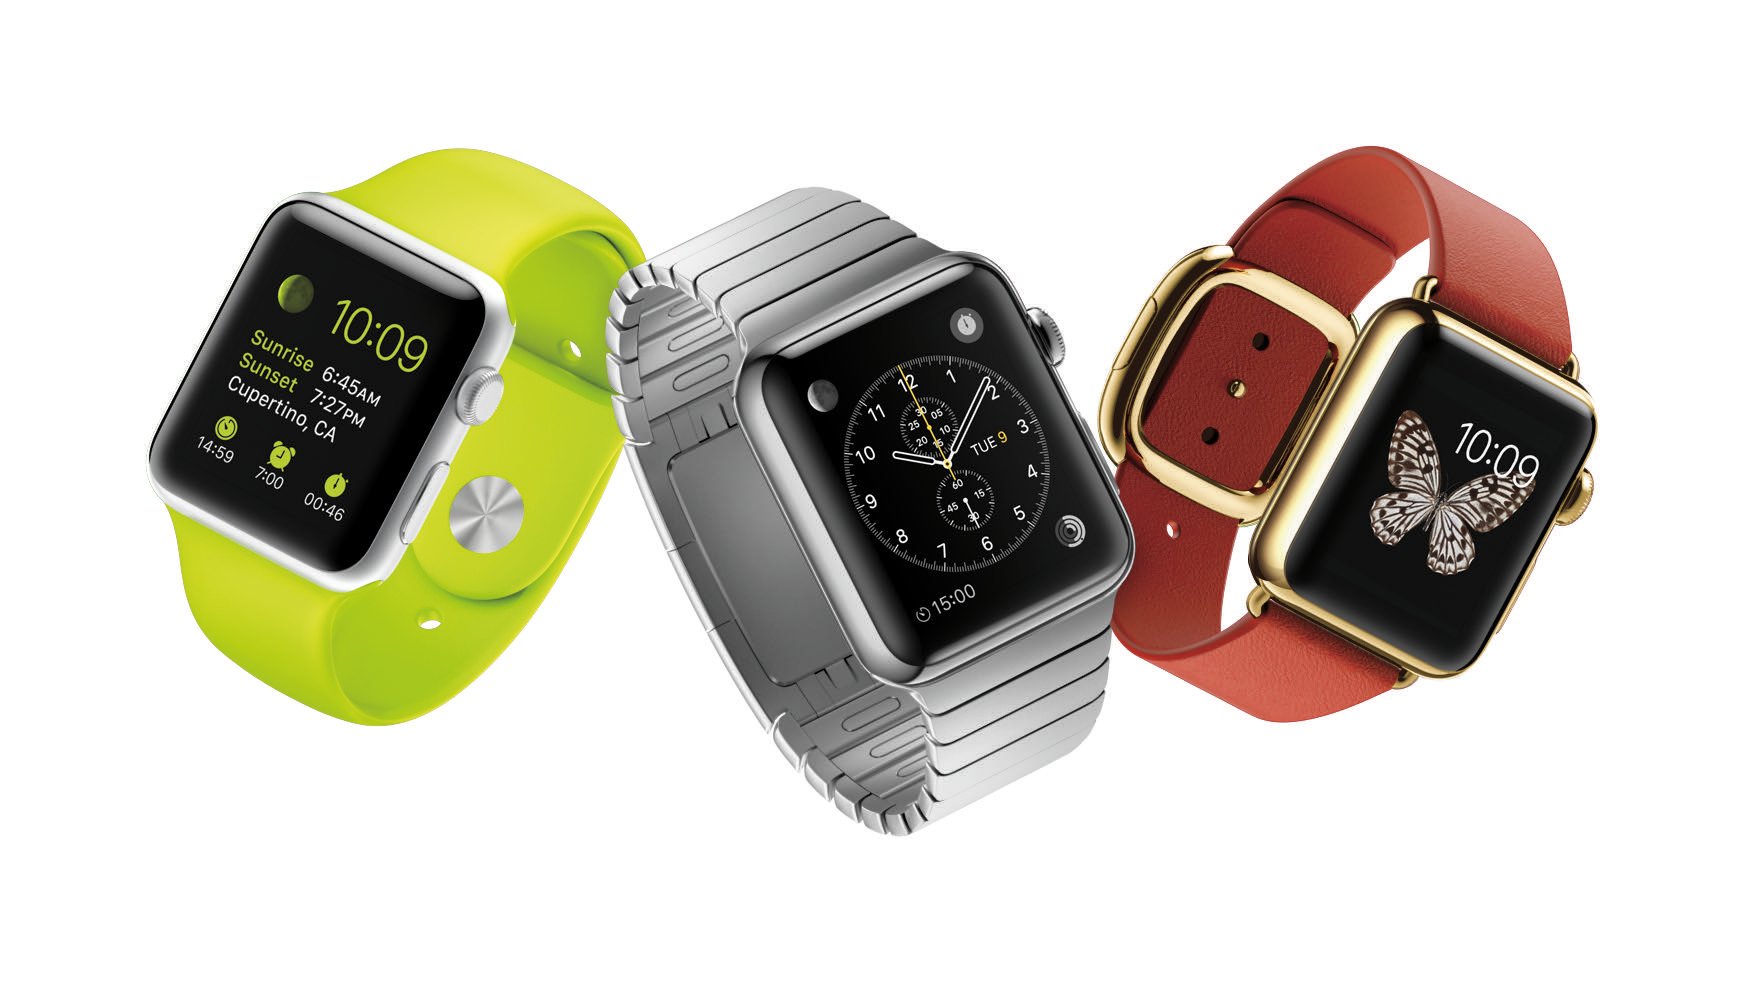 Key Apple Watch release details are the highlight of a new analyst report.